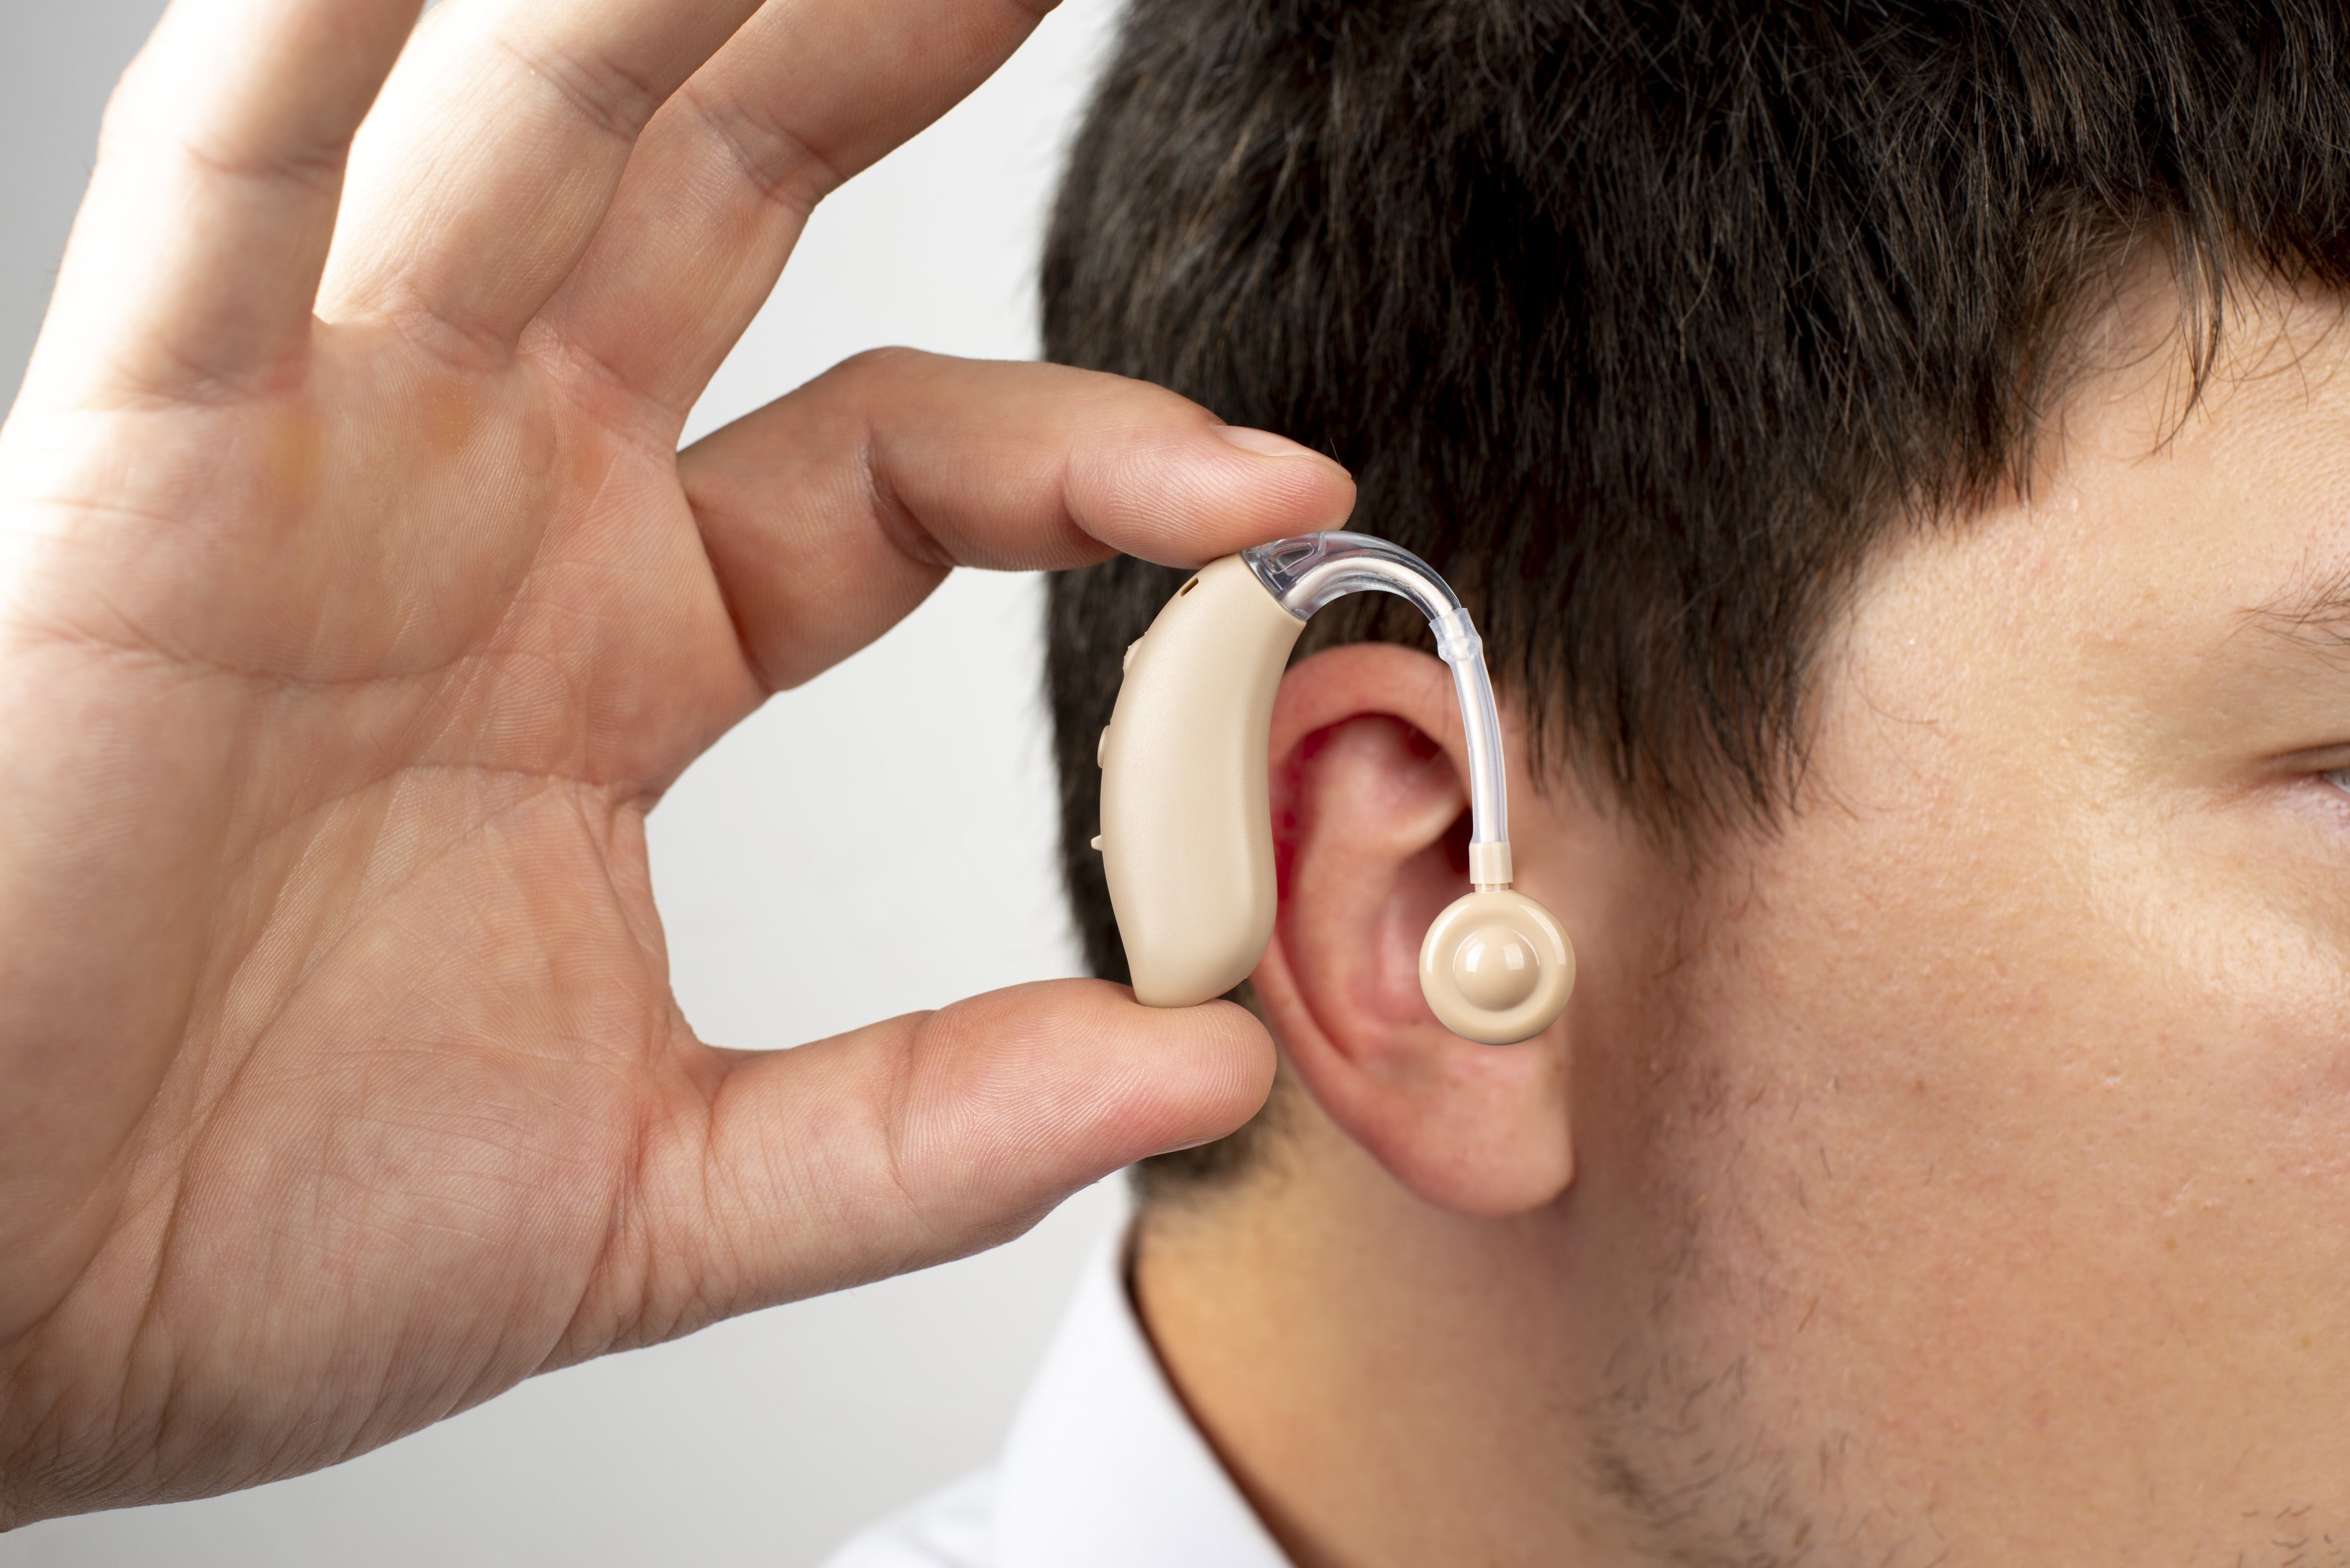 7 Top Ear Plugs for Sleeping: According to Experts